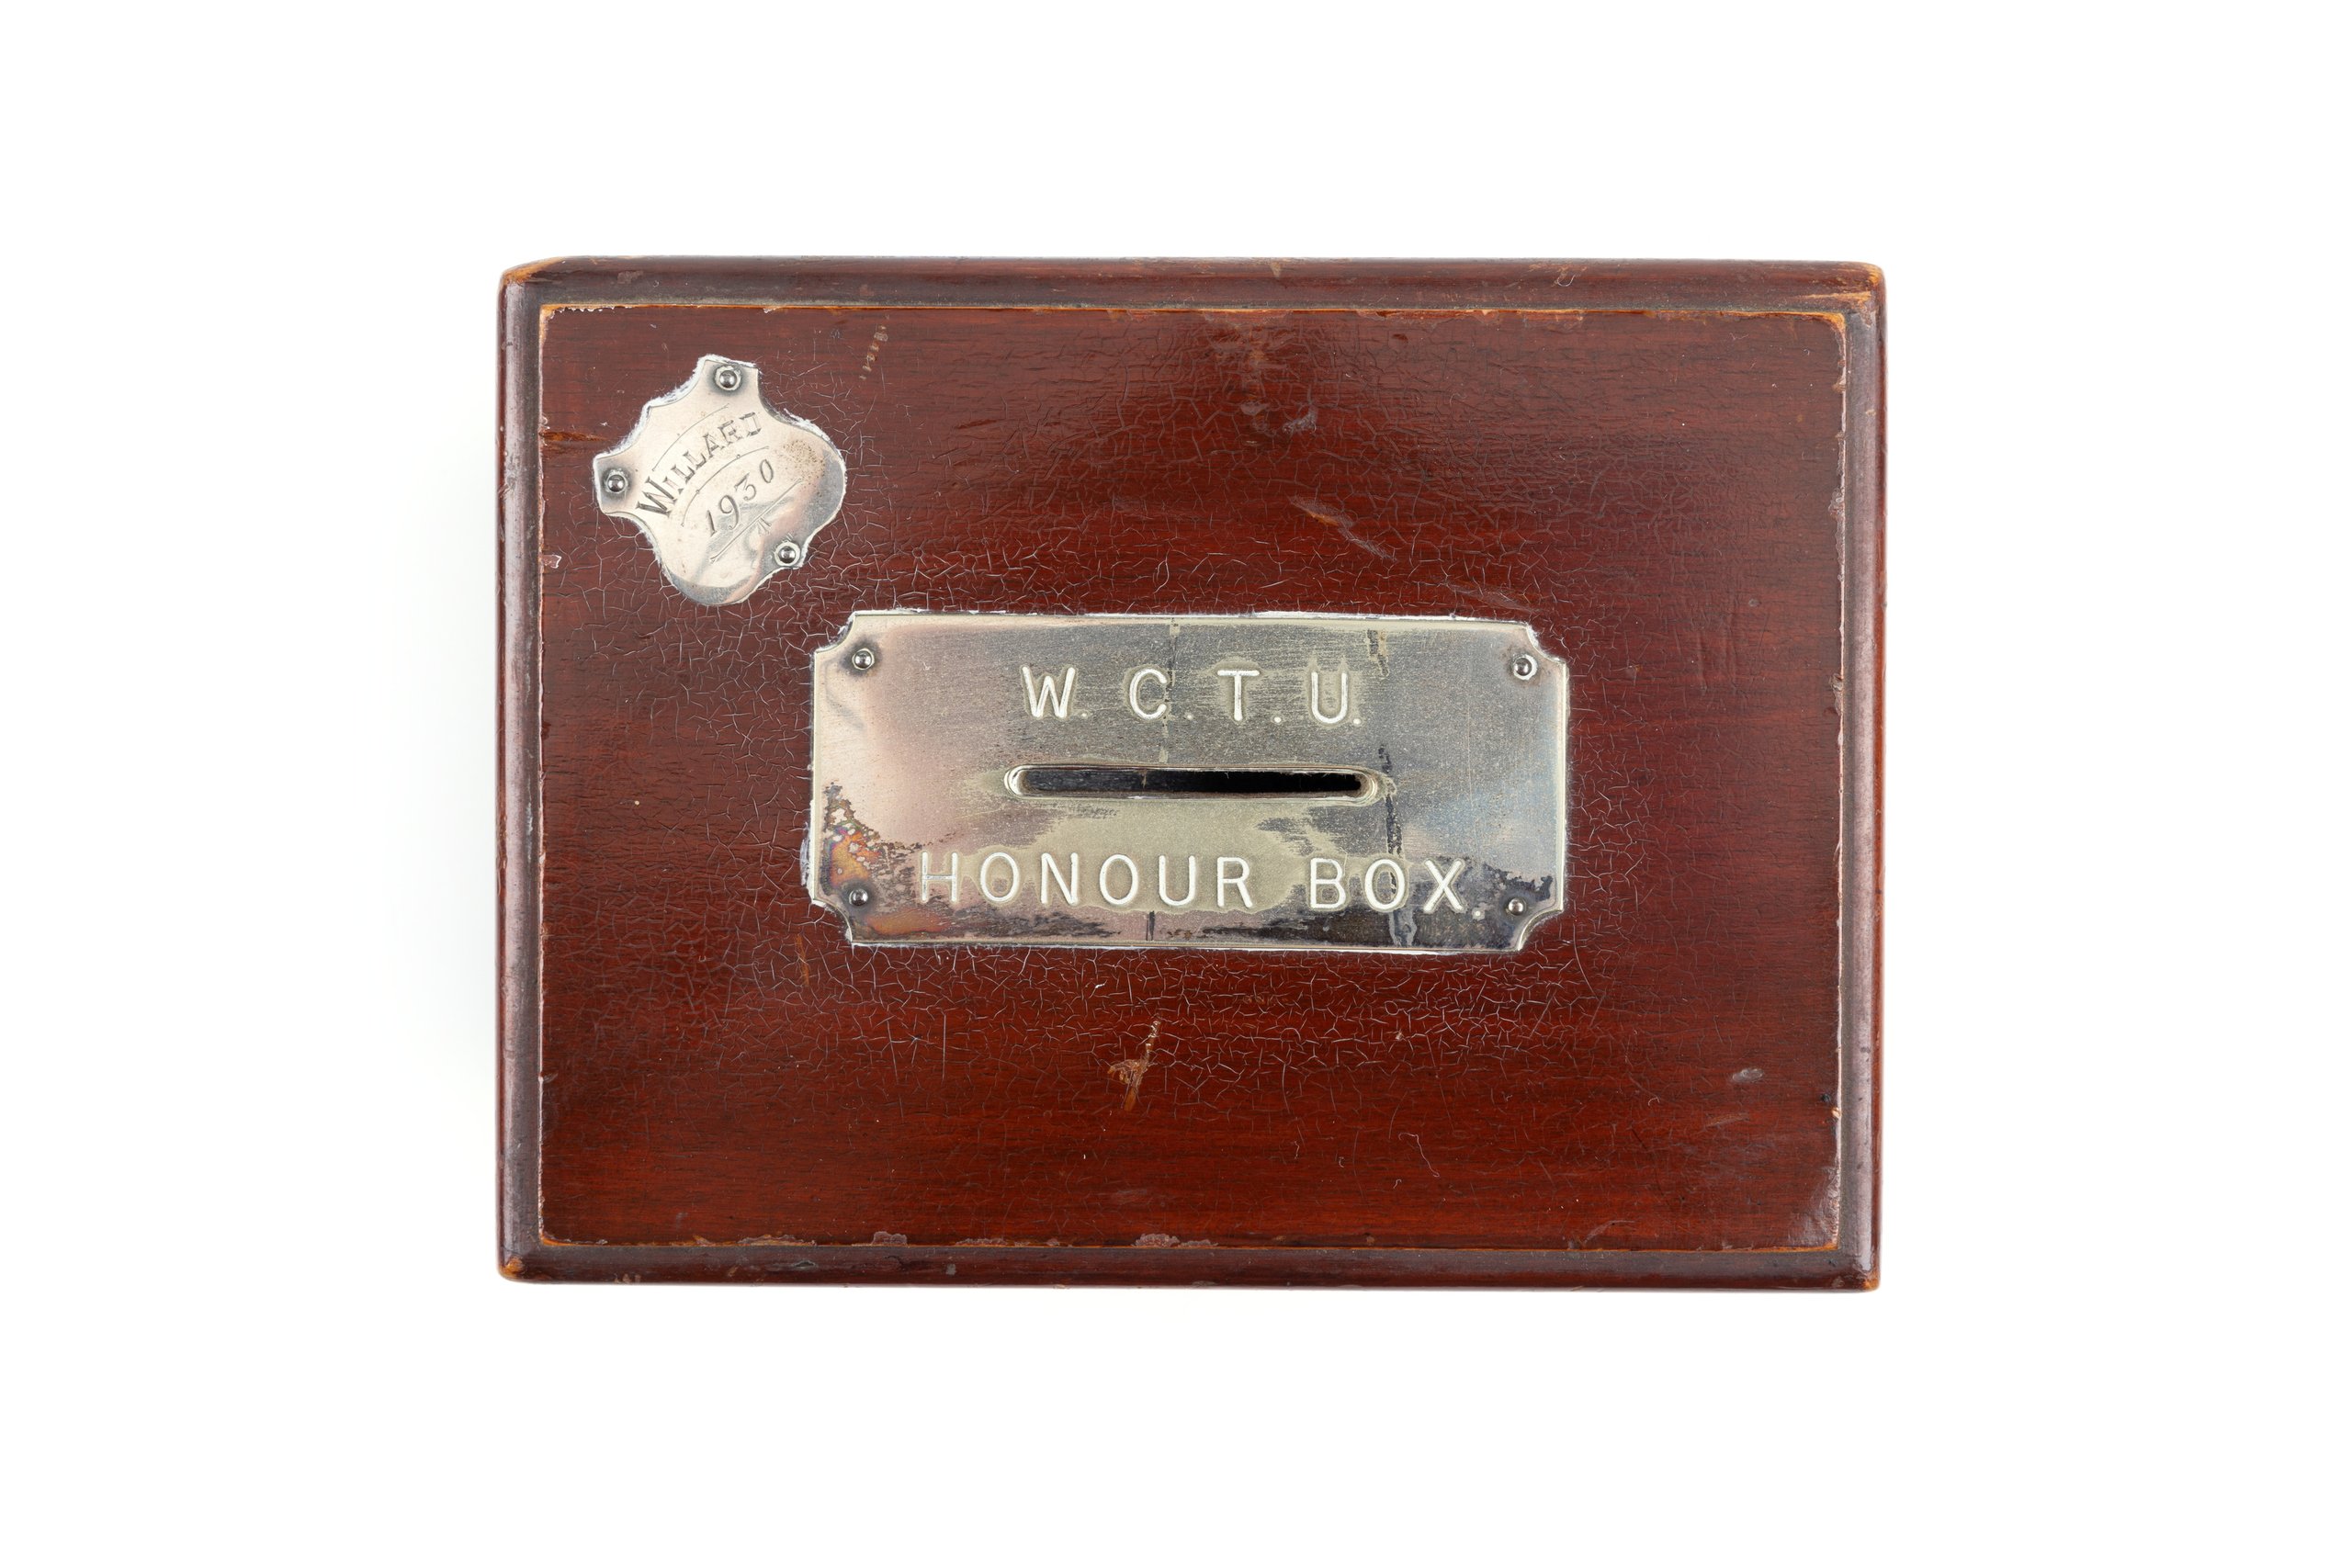 Money box used by the Woman's Christian Temperance Union of New South Wales